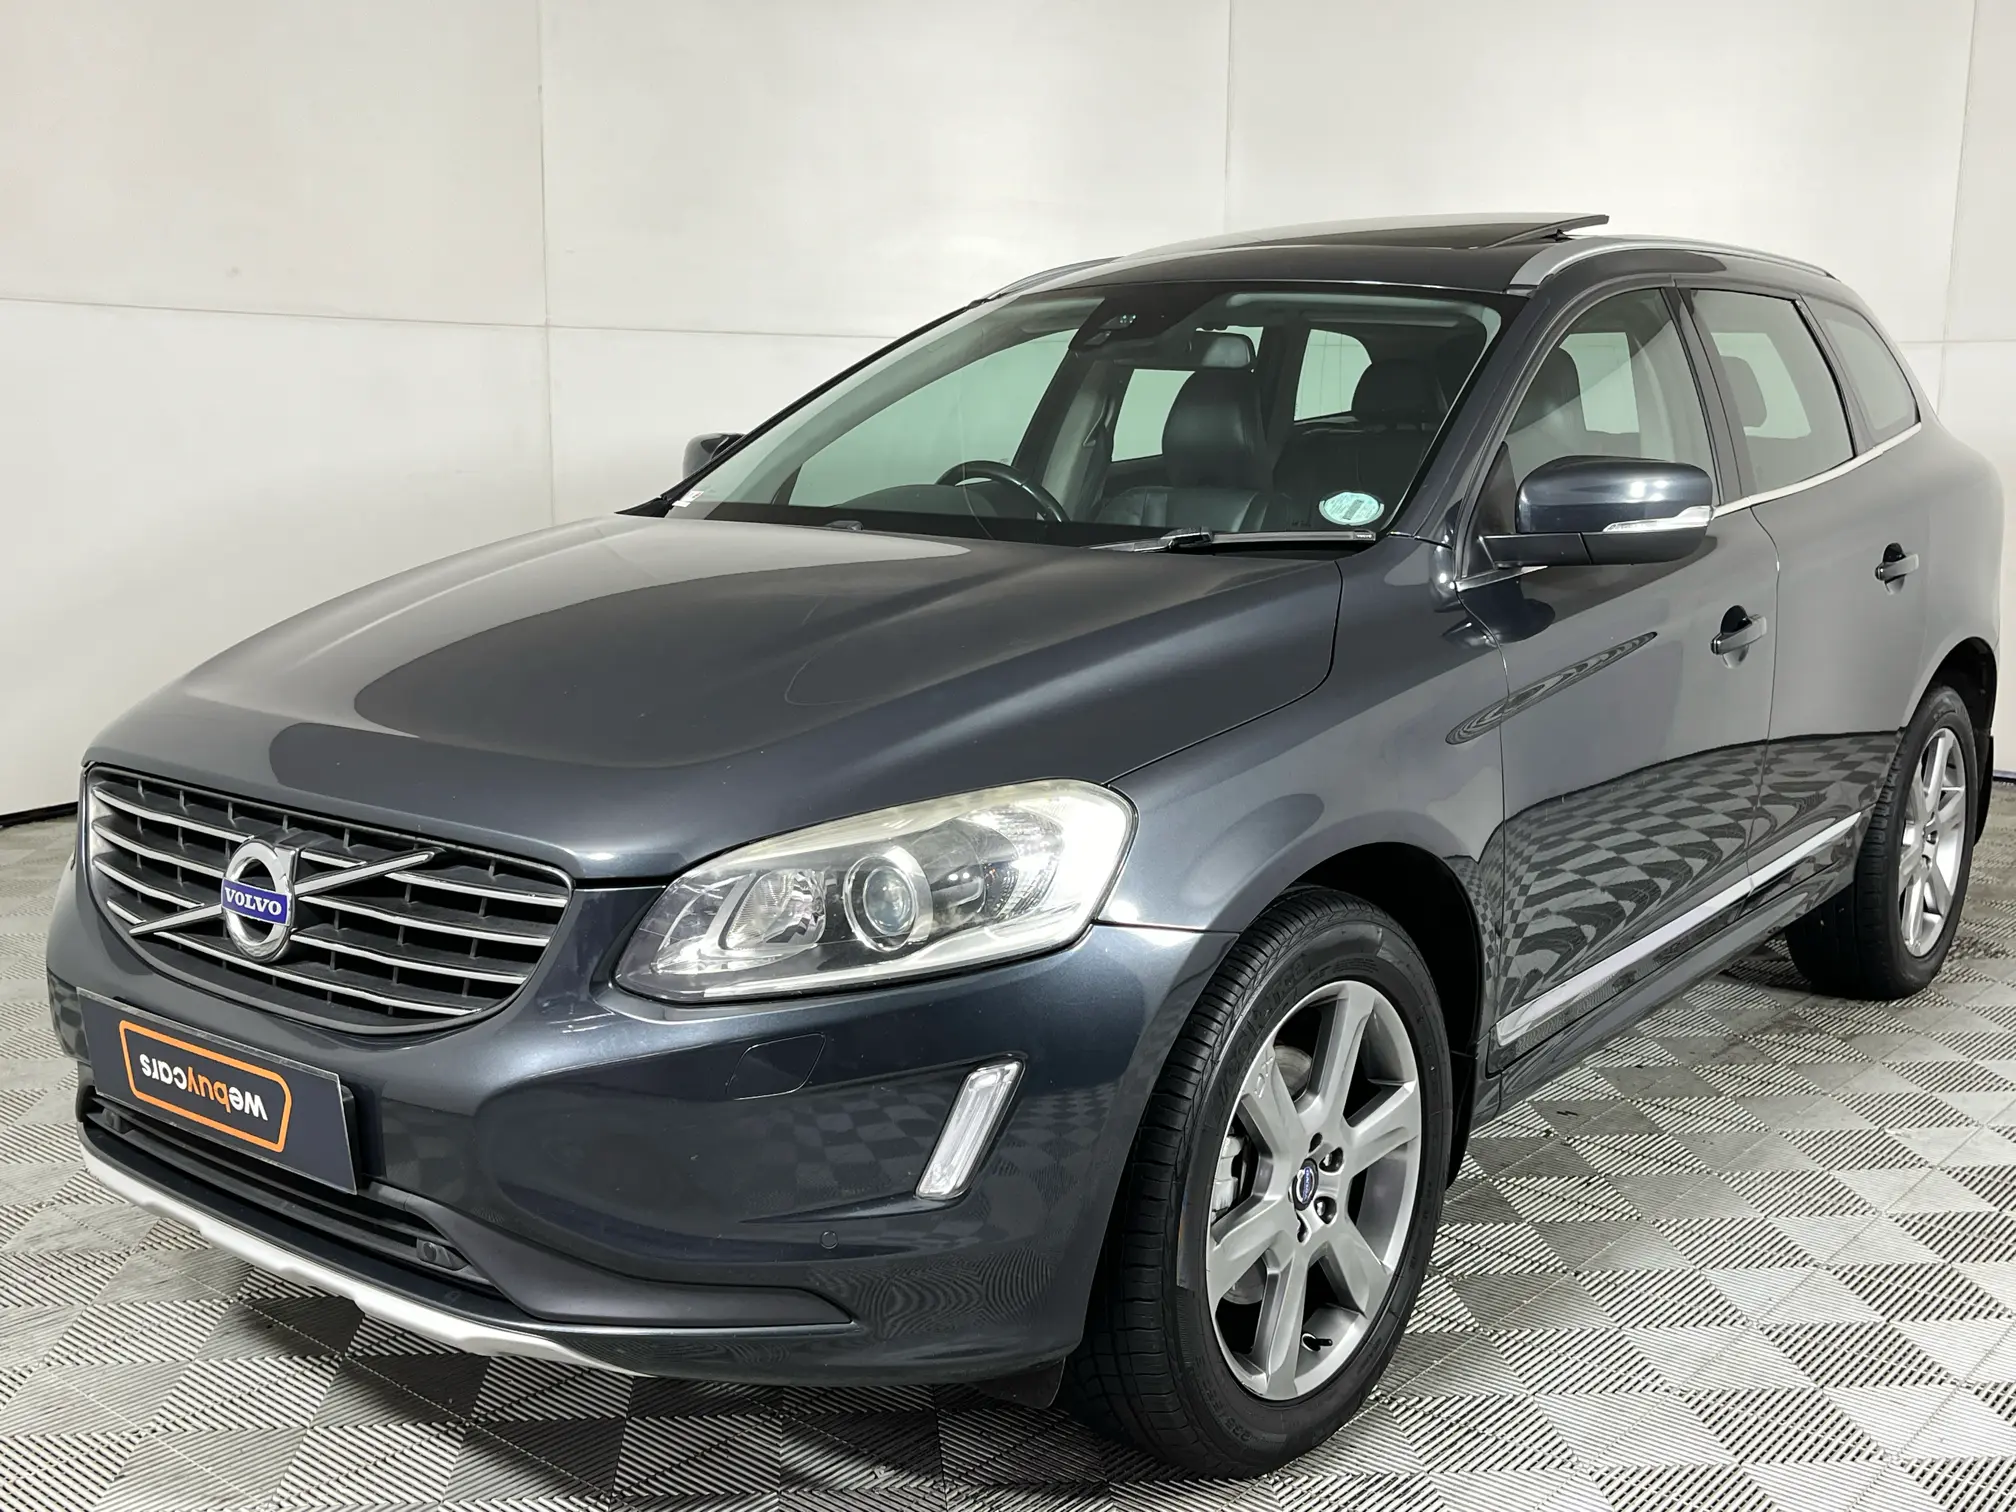 2014 Volvo Xc60 D4 Excel Geartronic